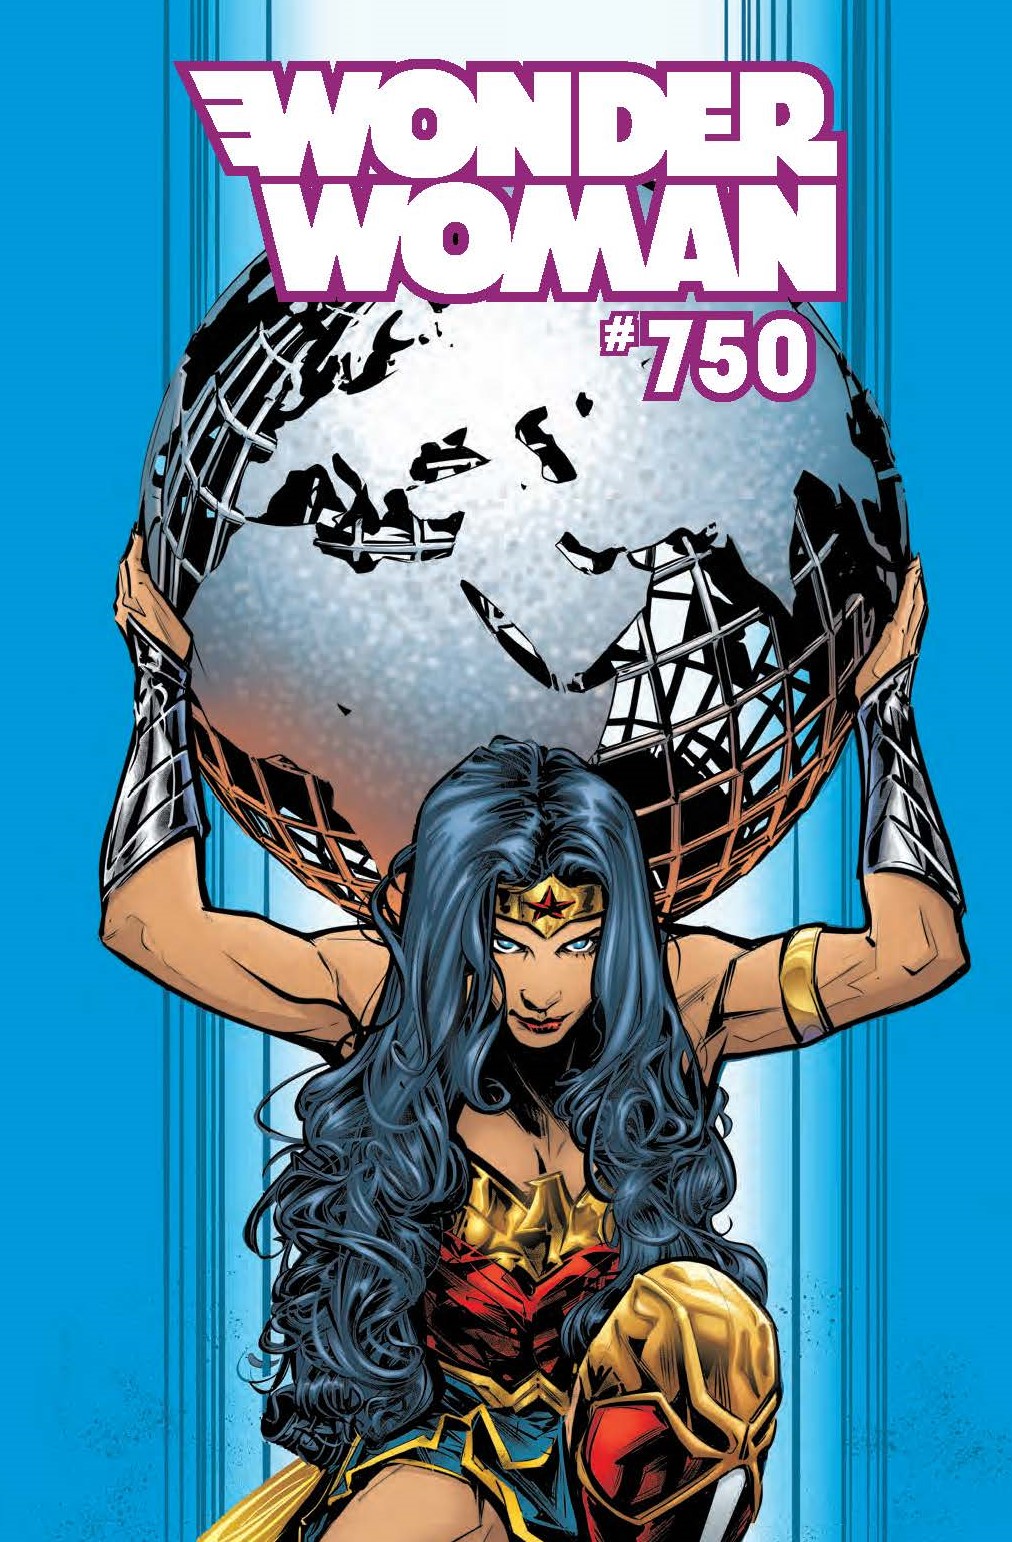 NOV 2019 DC PREVIEWS reduced_Page_01 Cropped